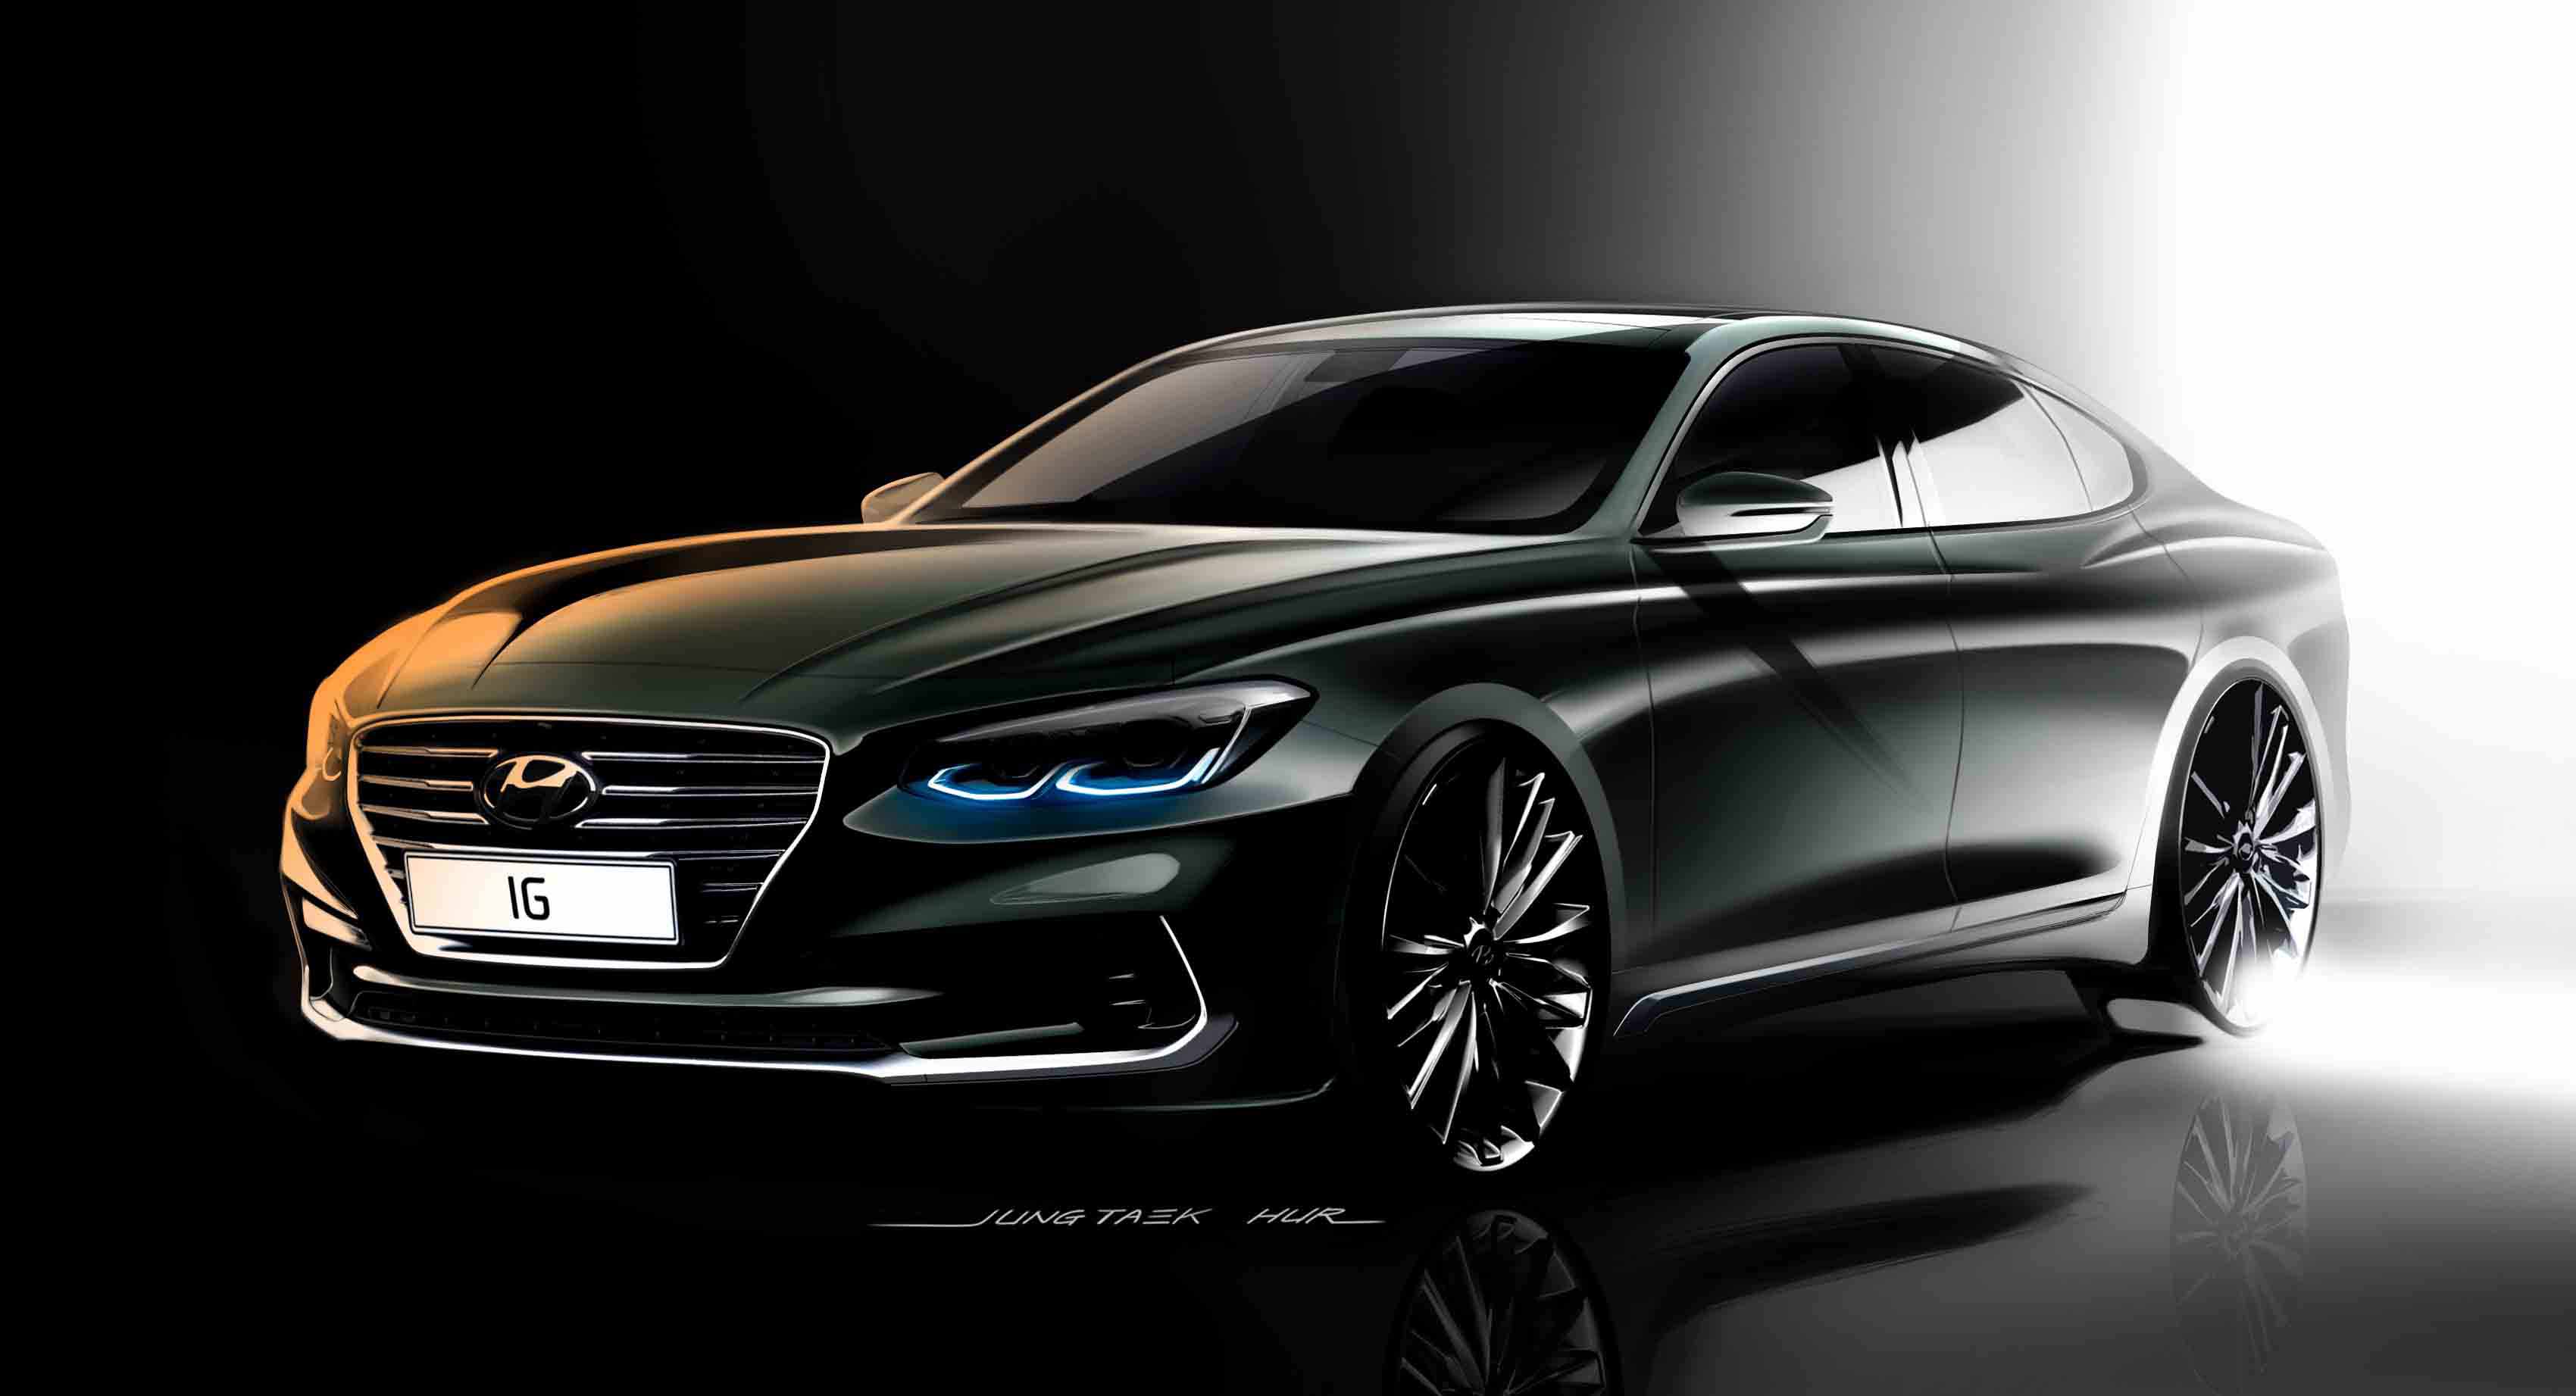 Hyundai Motor unveils First Depictions of All-new Azera